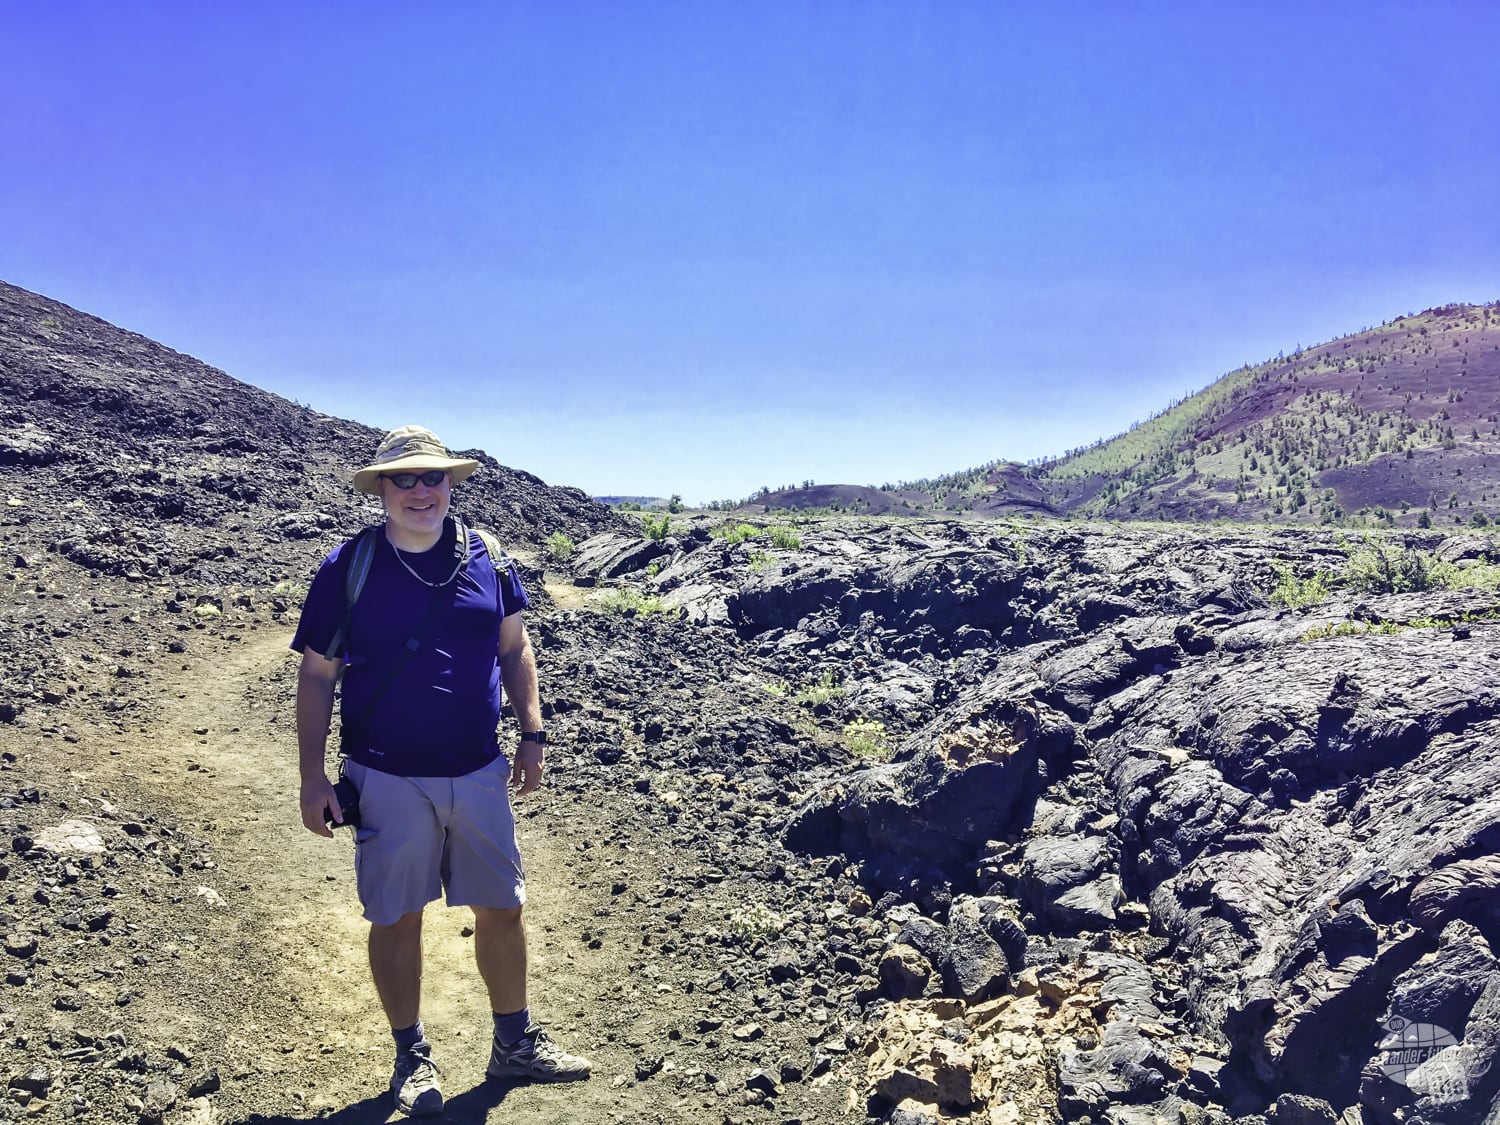 Grant on the trail in Craters of the Moon National Monument